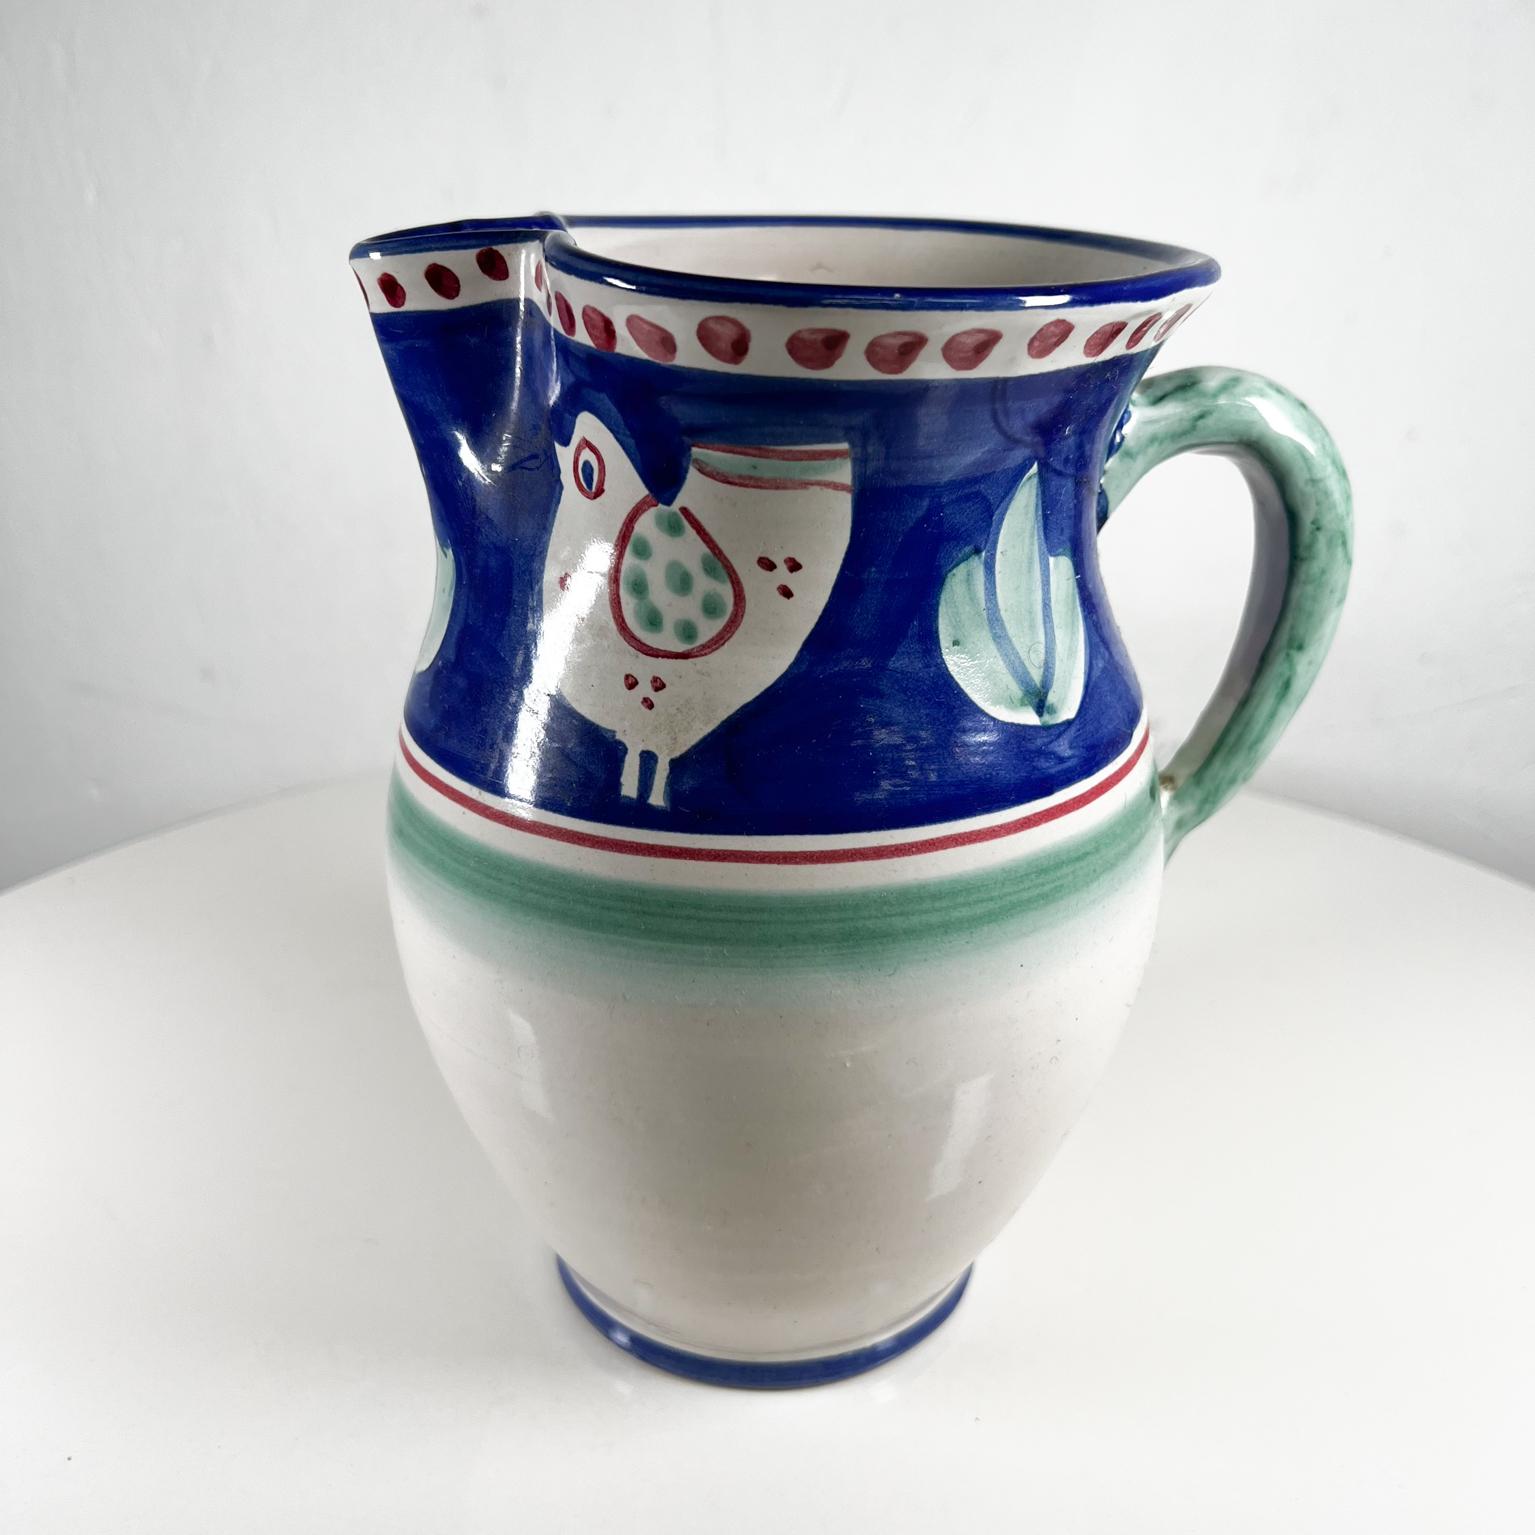 Solimene Hand Painted Vietri Italian ceramic blue green pitcher chicks design Italy
CERAMICHE SOLIMENE 
Vintage Italian blue pitcher signed at bottom, Solimene Italy
7.25 d x 5.75 w x 8.5 tall
Original vintage condition
See all images.


